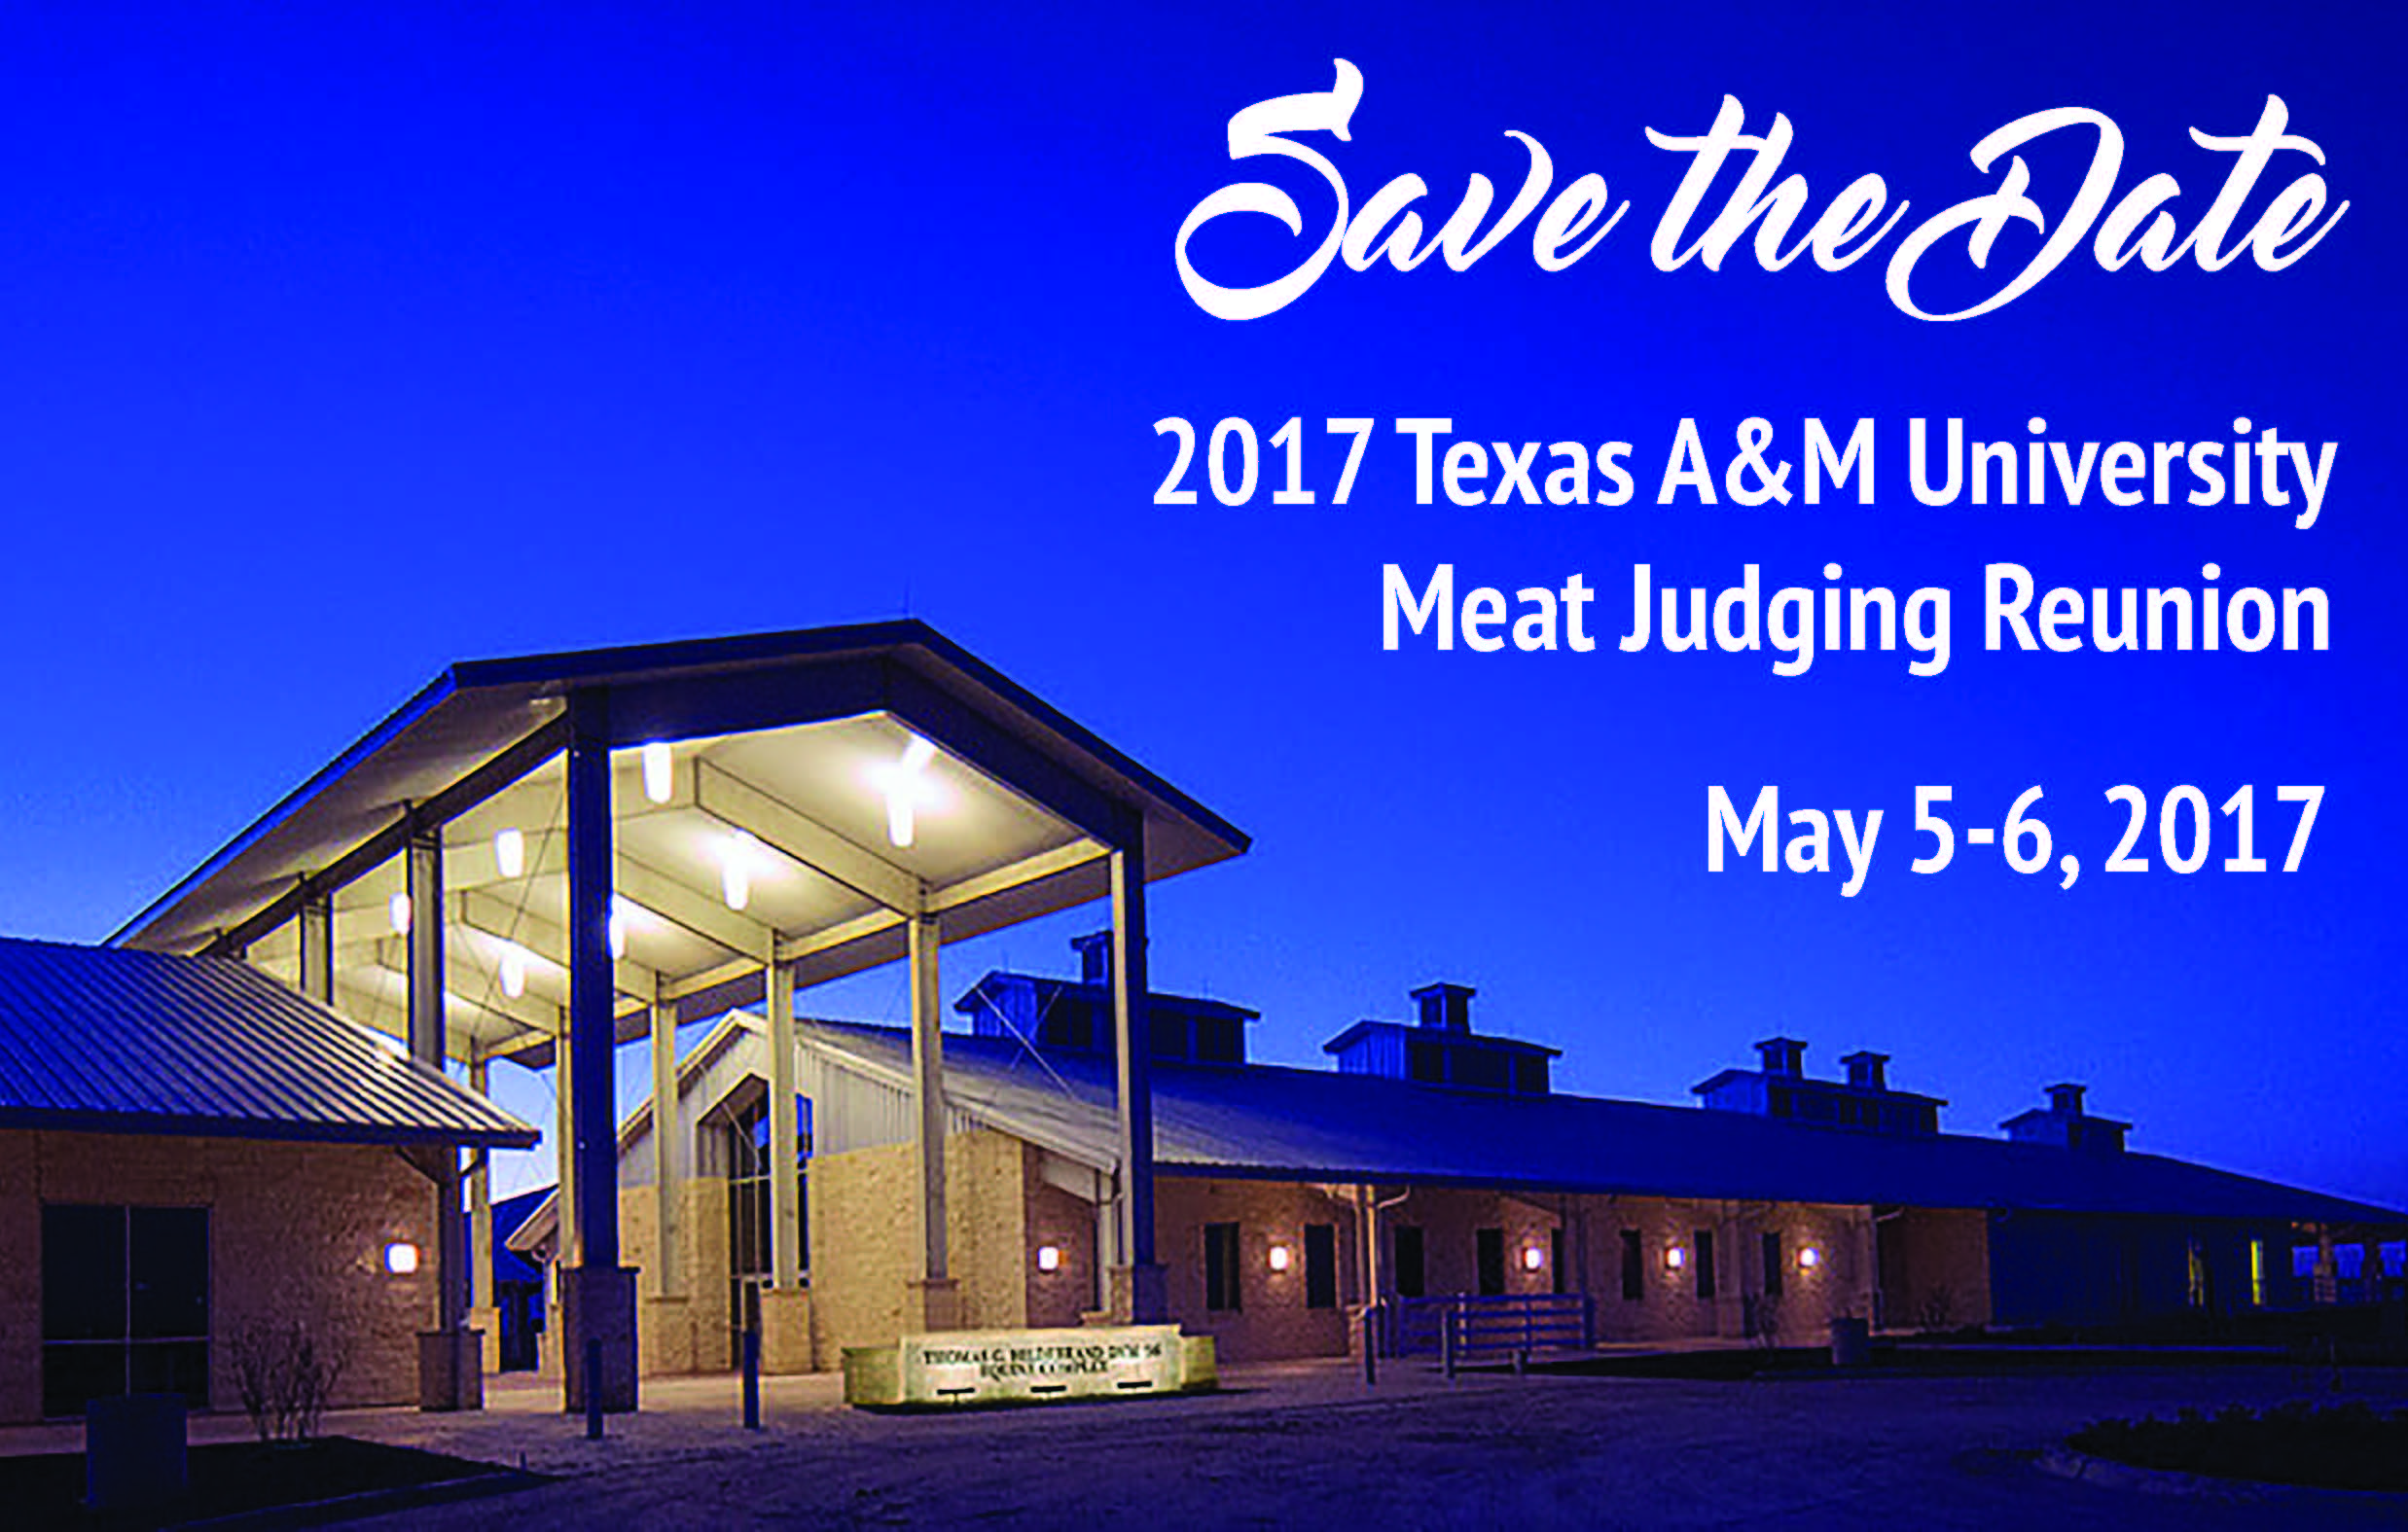 Save the date, 2017 Texas A&M University Meat Judging Reunion, May 5-6, 2017